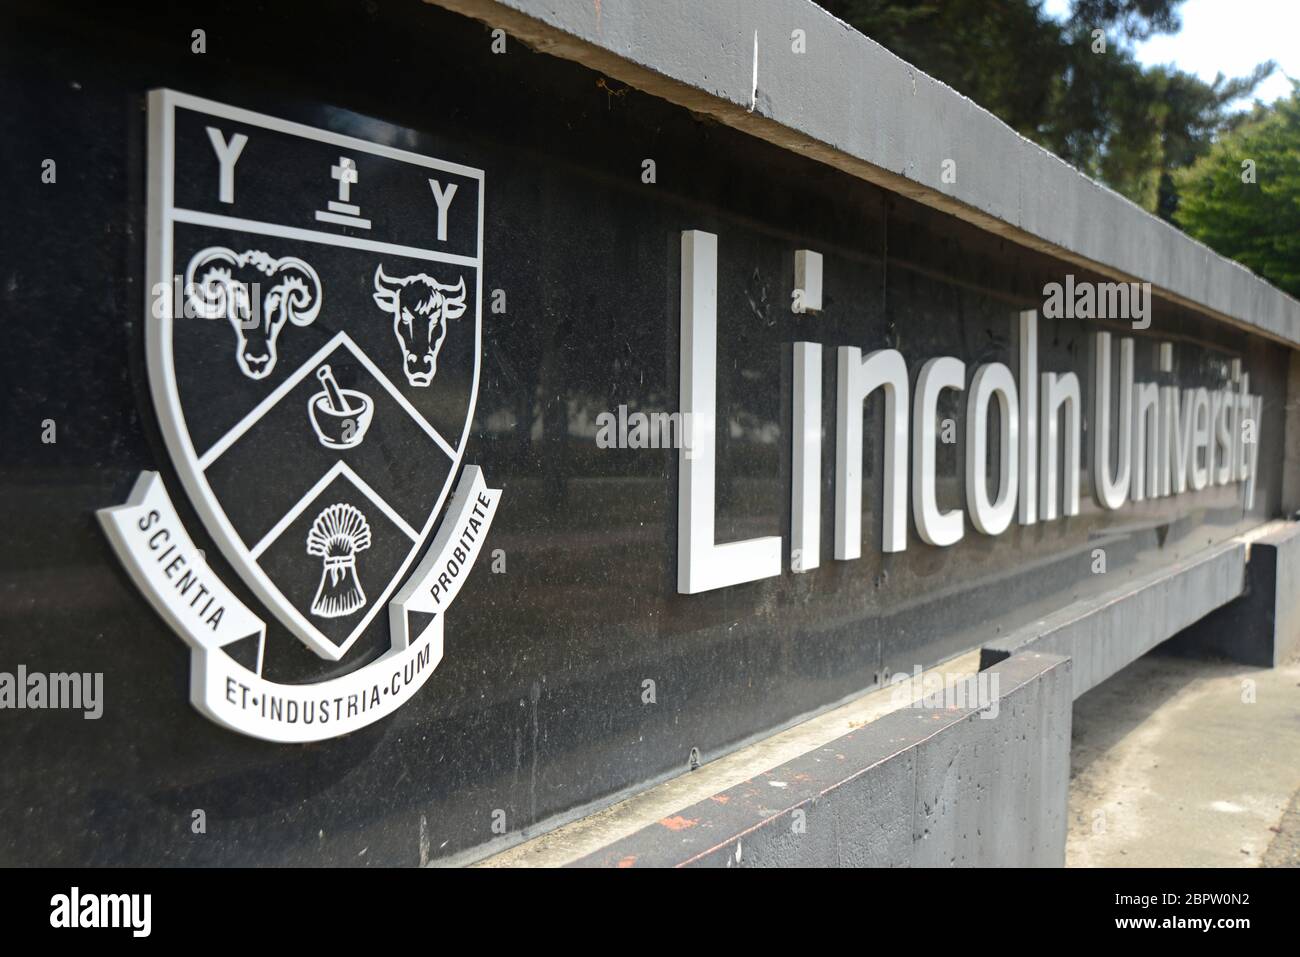 Signage for Lincoln University, an agricultural university in Canterbury, South Island, New Zealand Stock Photo